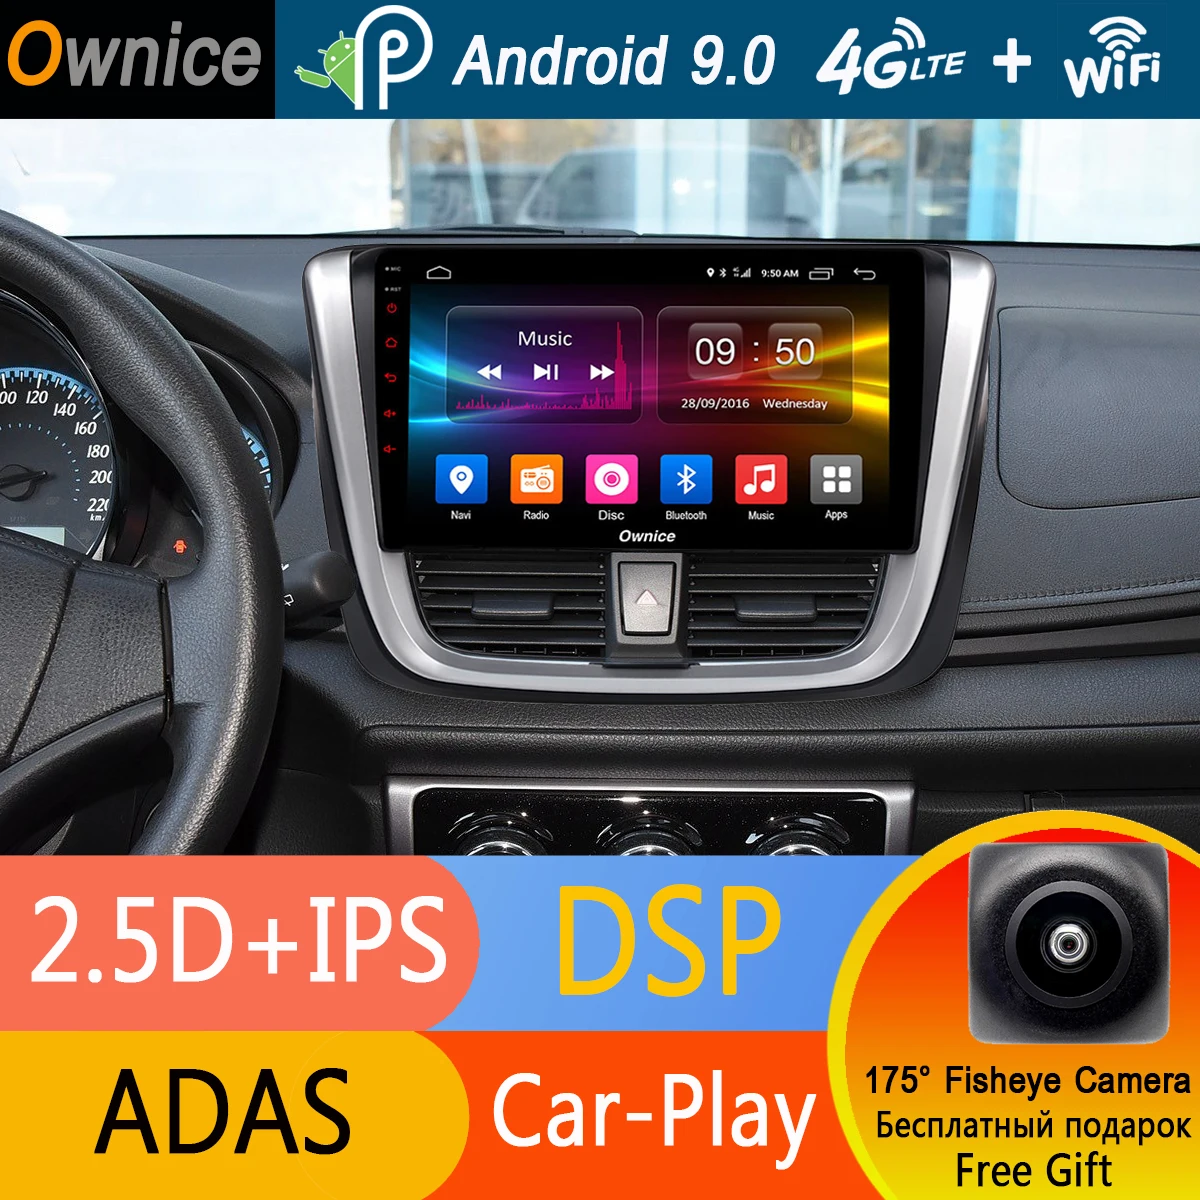 Clearance 10.1" IPS 8 Core 4G+32G Android 9.0 Car DVD Player GPS Radio For Toyota Yaris L Vios 2016 2017 2018 2019 DSP CarPlay Multimedia 0